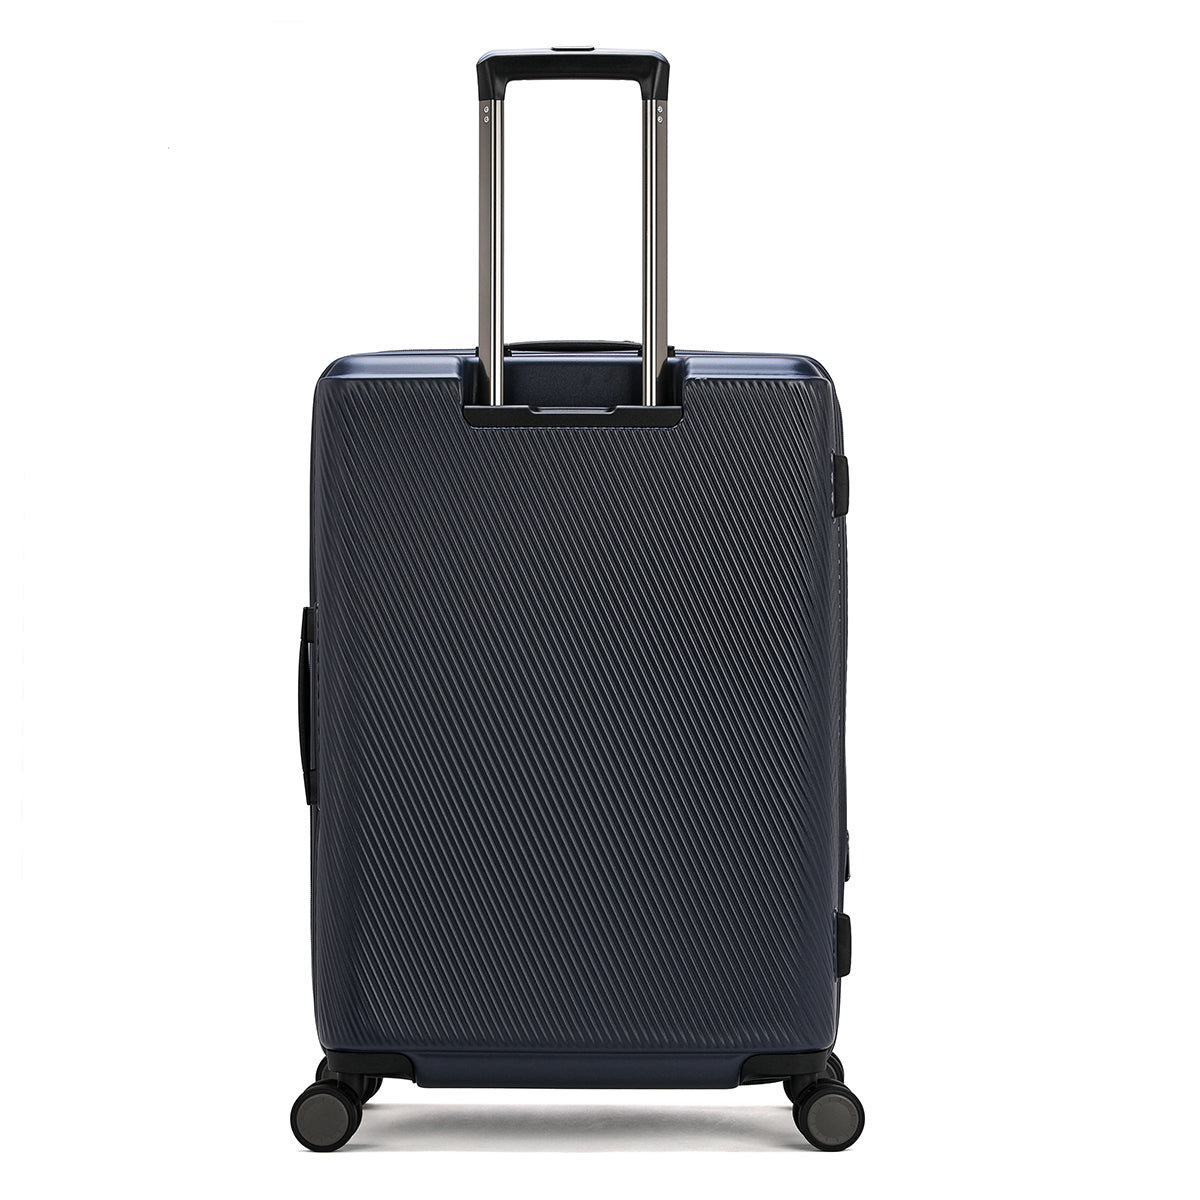 Highly durable polycarbonate travel bags in several sizes, dark blue colour